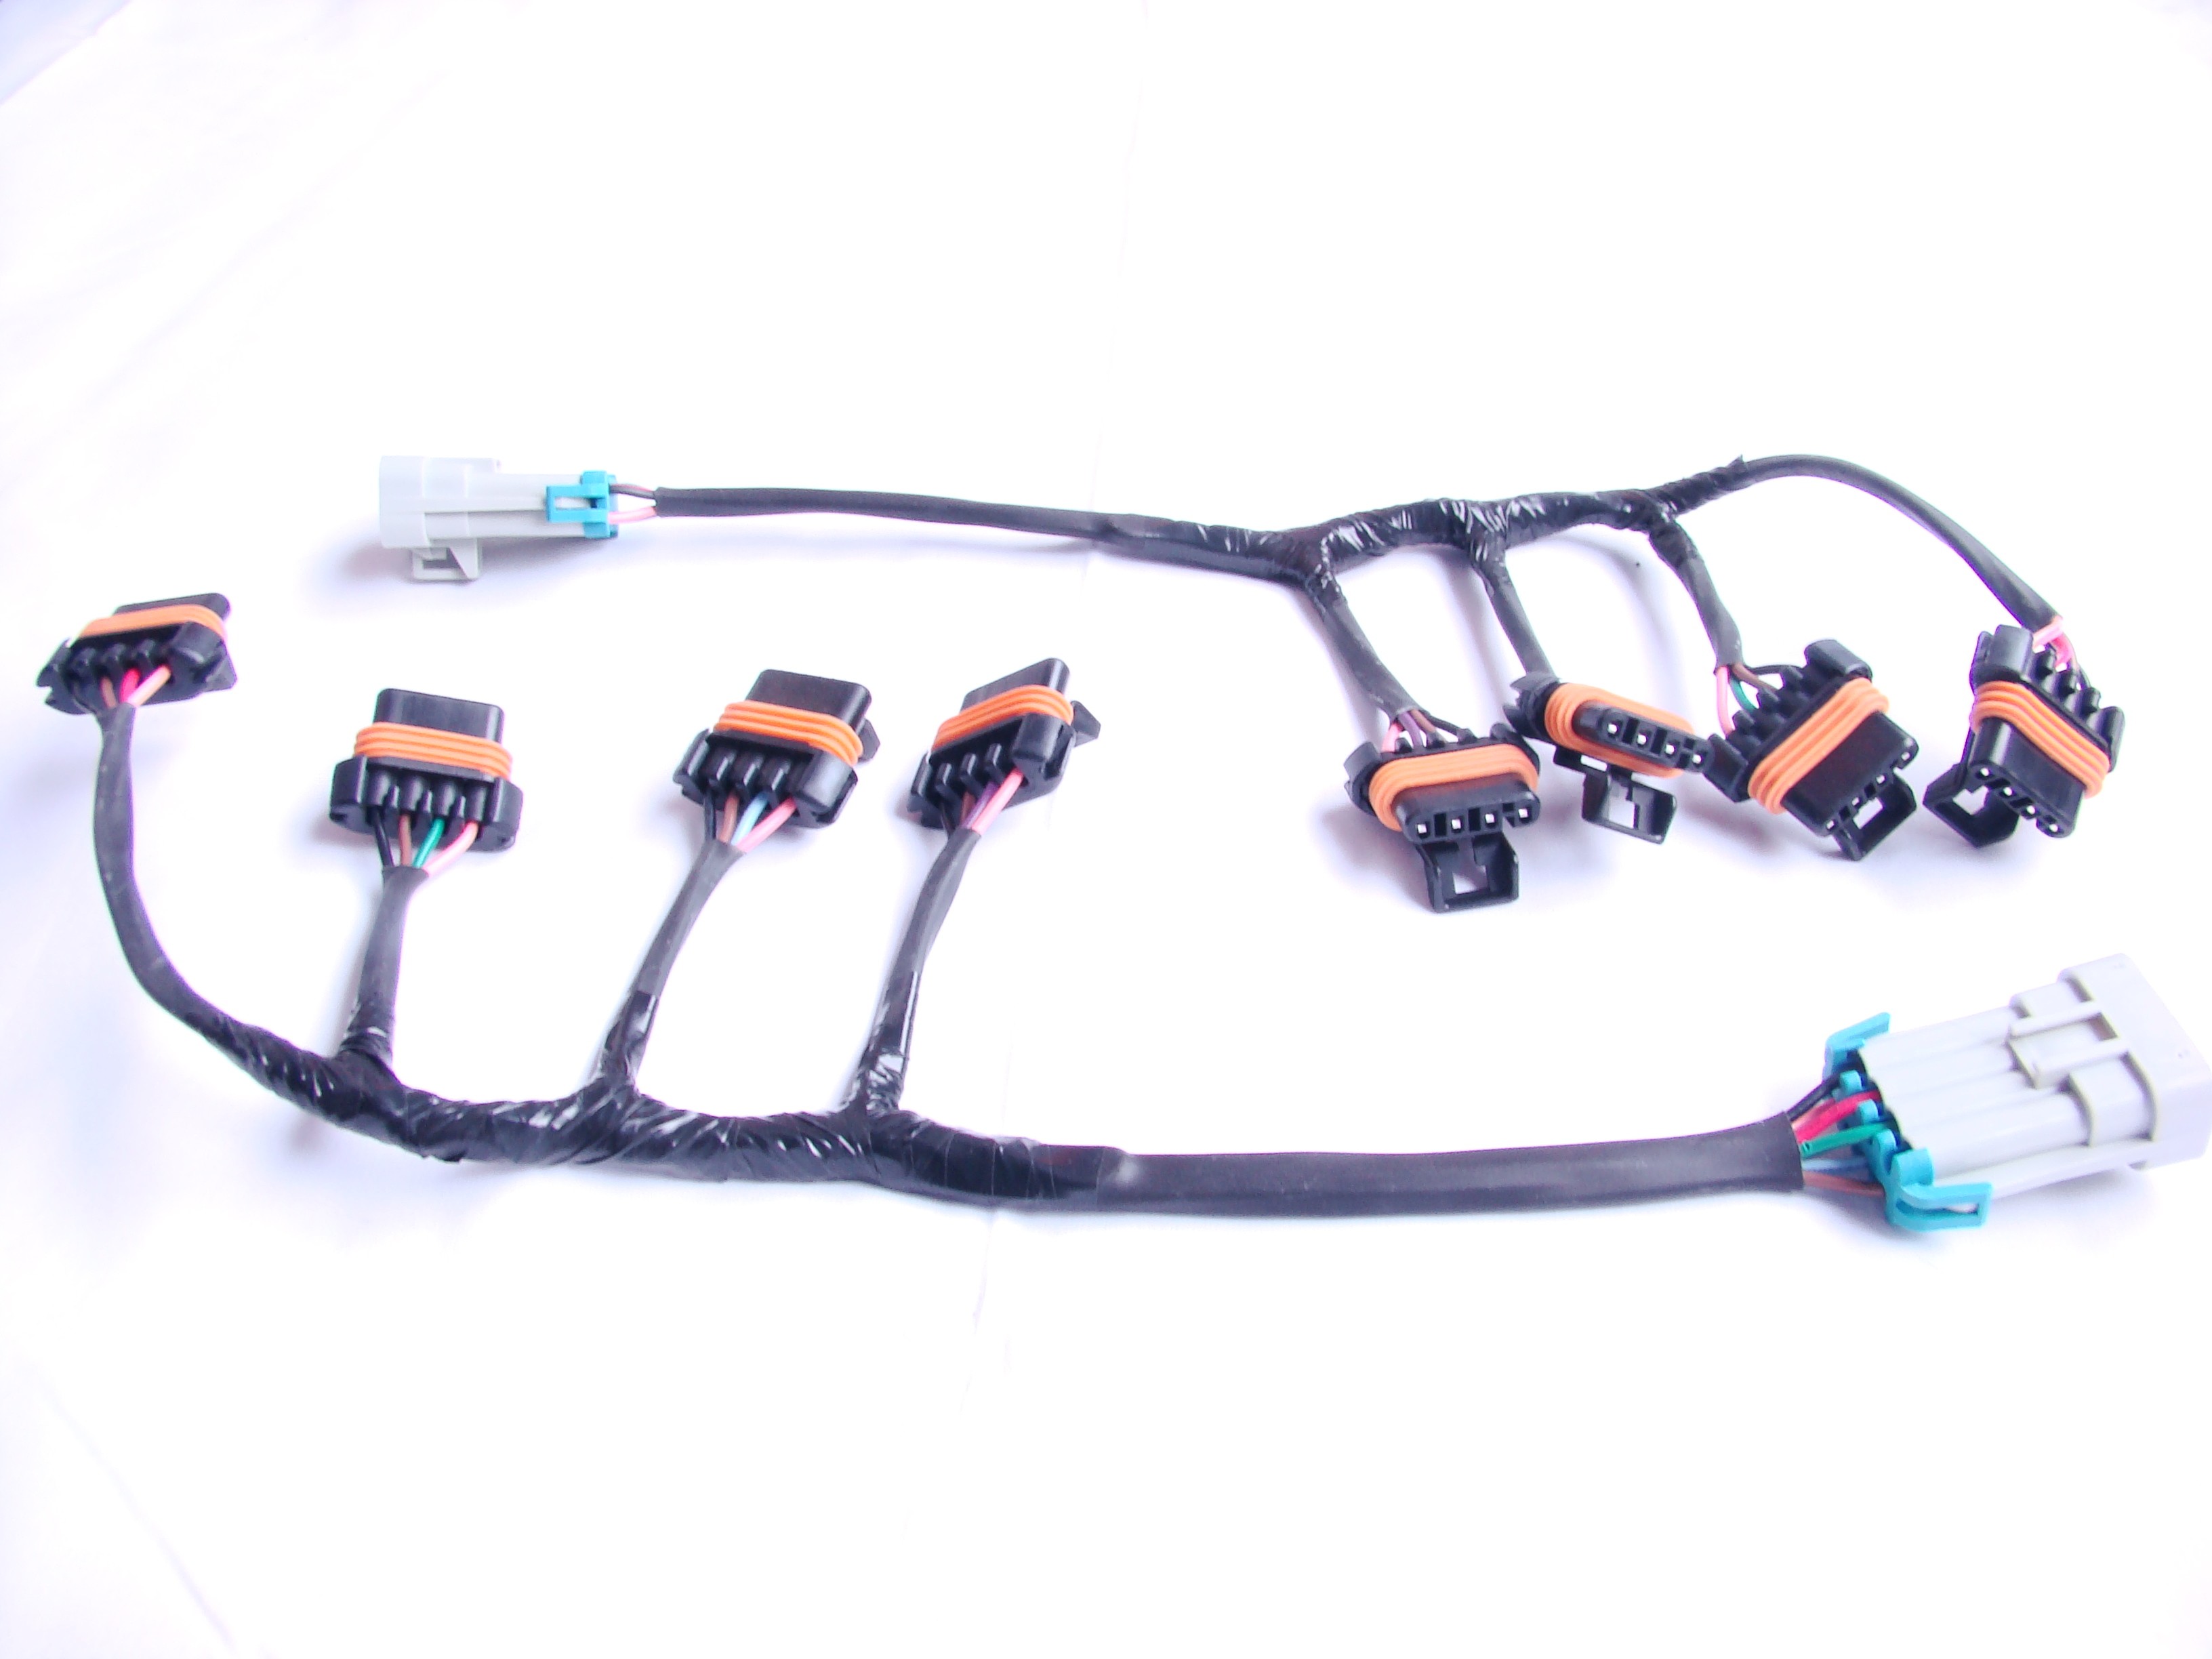 On 3 Performance LSX Coil Relocation Sub Harness – LS1 ... ls7 coil wiring 